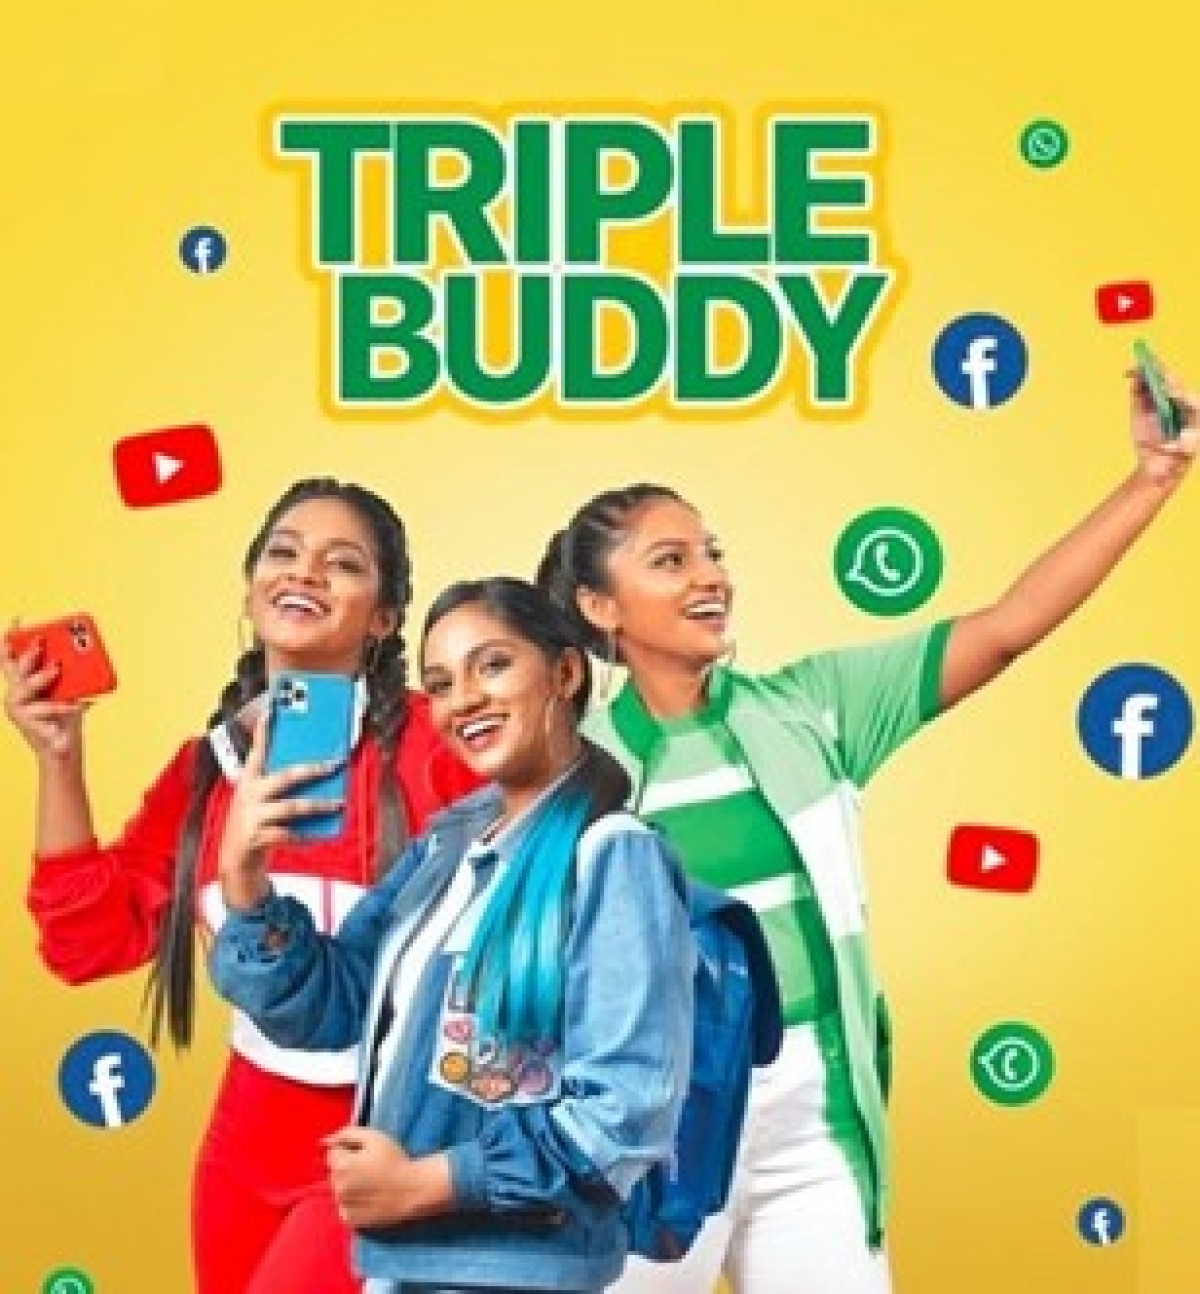 SLT-MOBITEL Mobile offers ‘Triple Buddy’ - Nonstop Data for Facebook, WhatsApp and YouTube